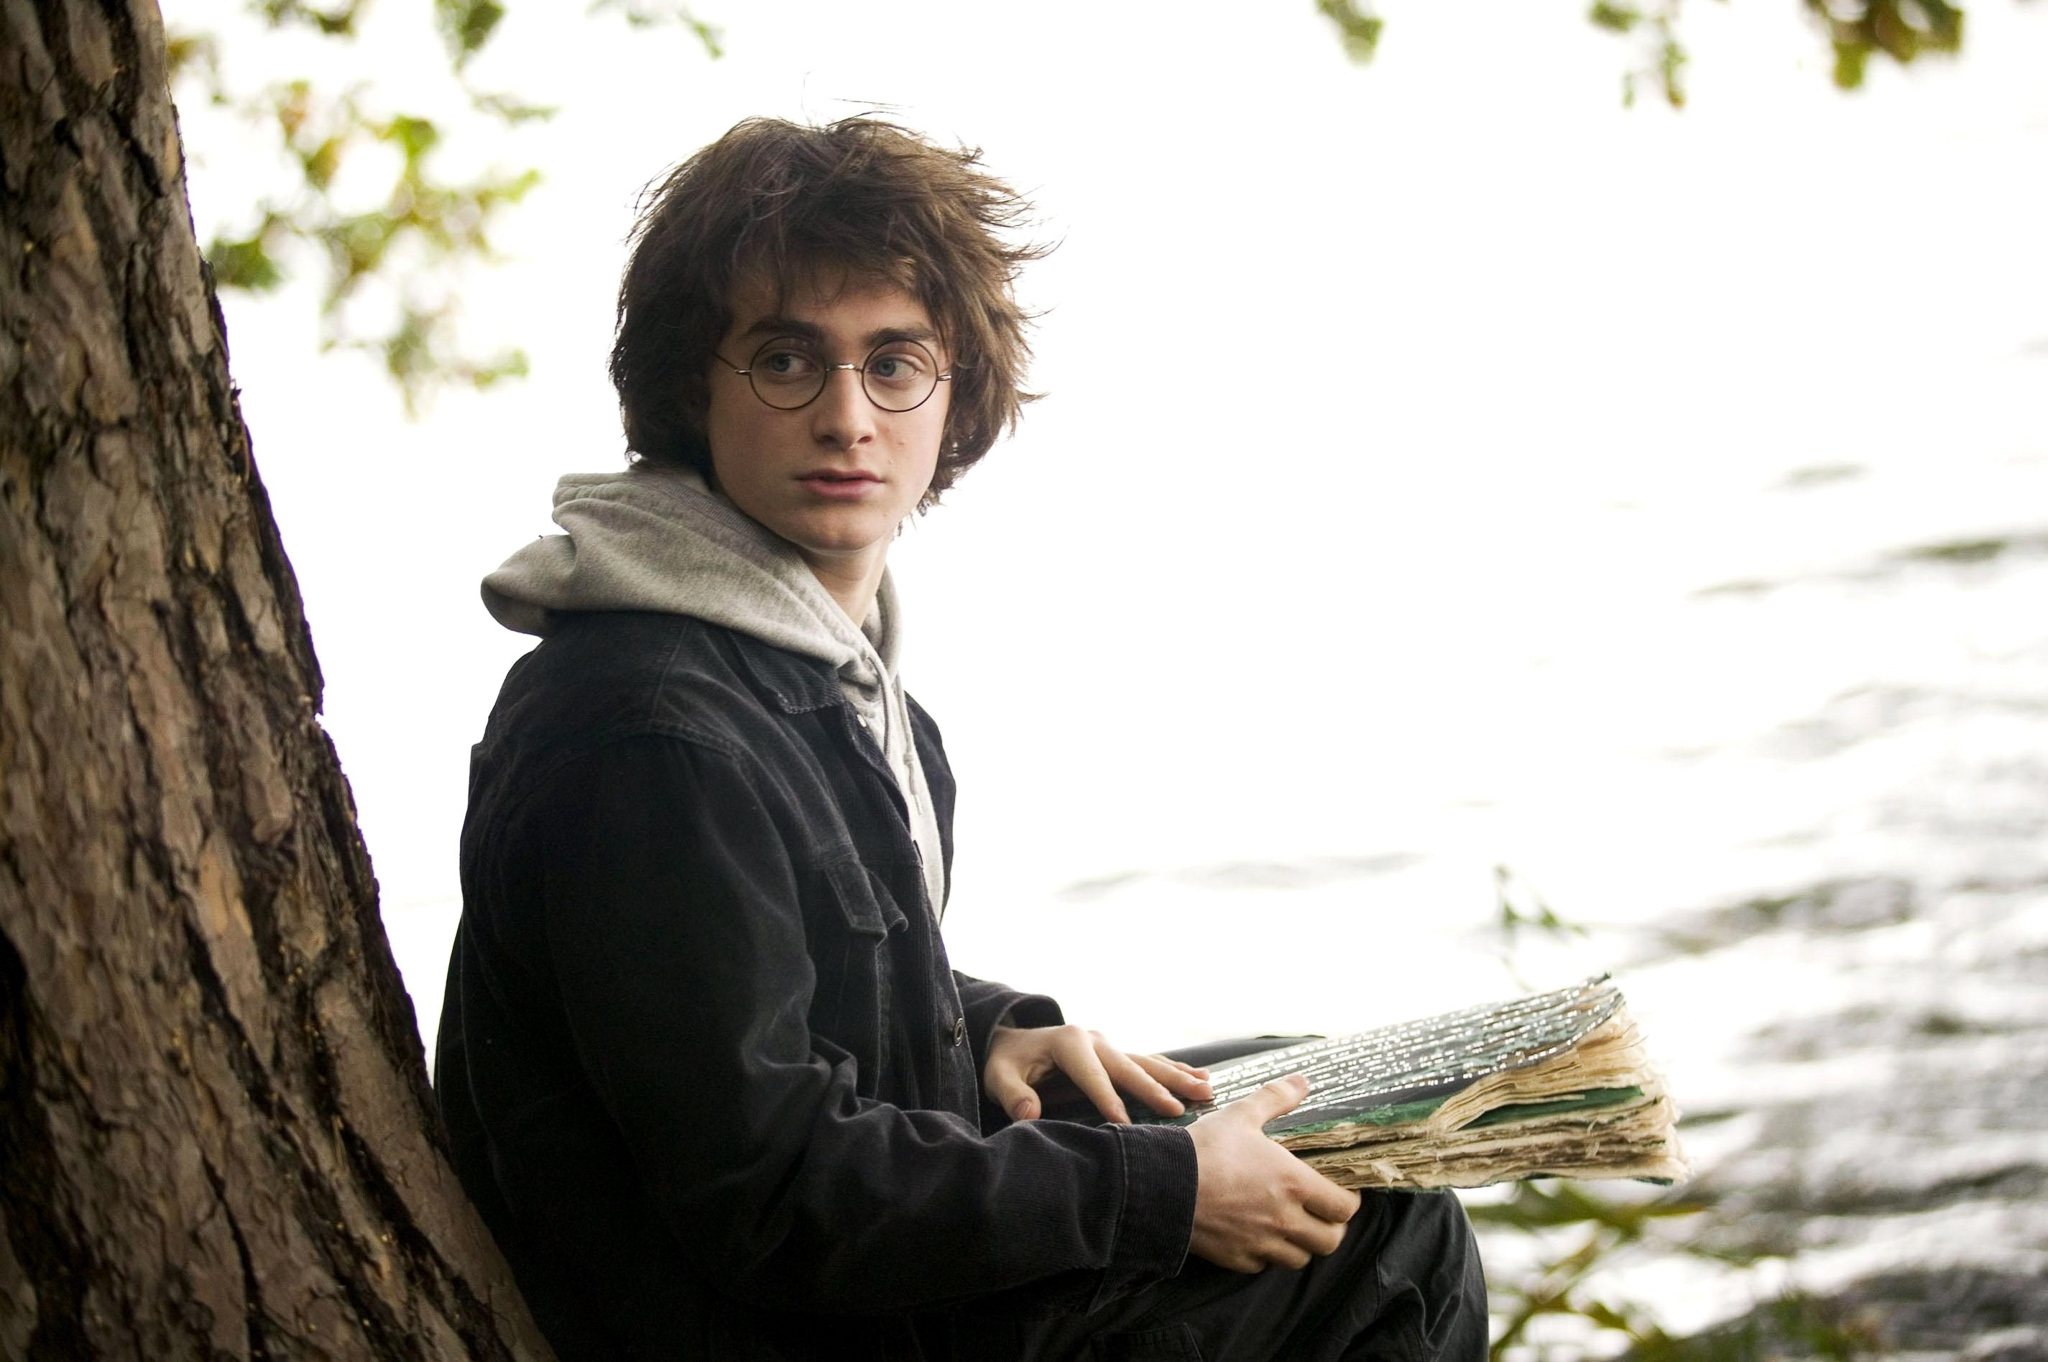 Daniel Radcliffe as Harry Potter, sat reading a book under a tree by Virginia Water Lake